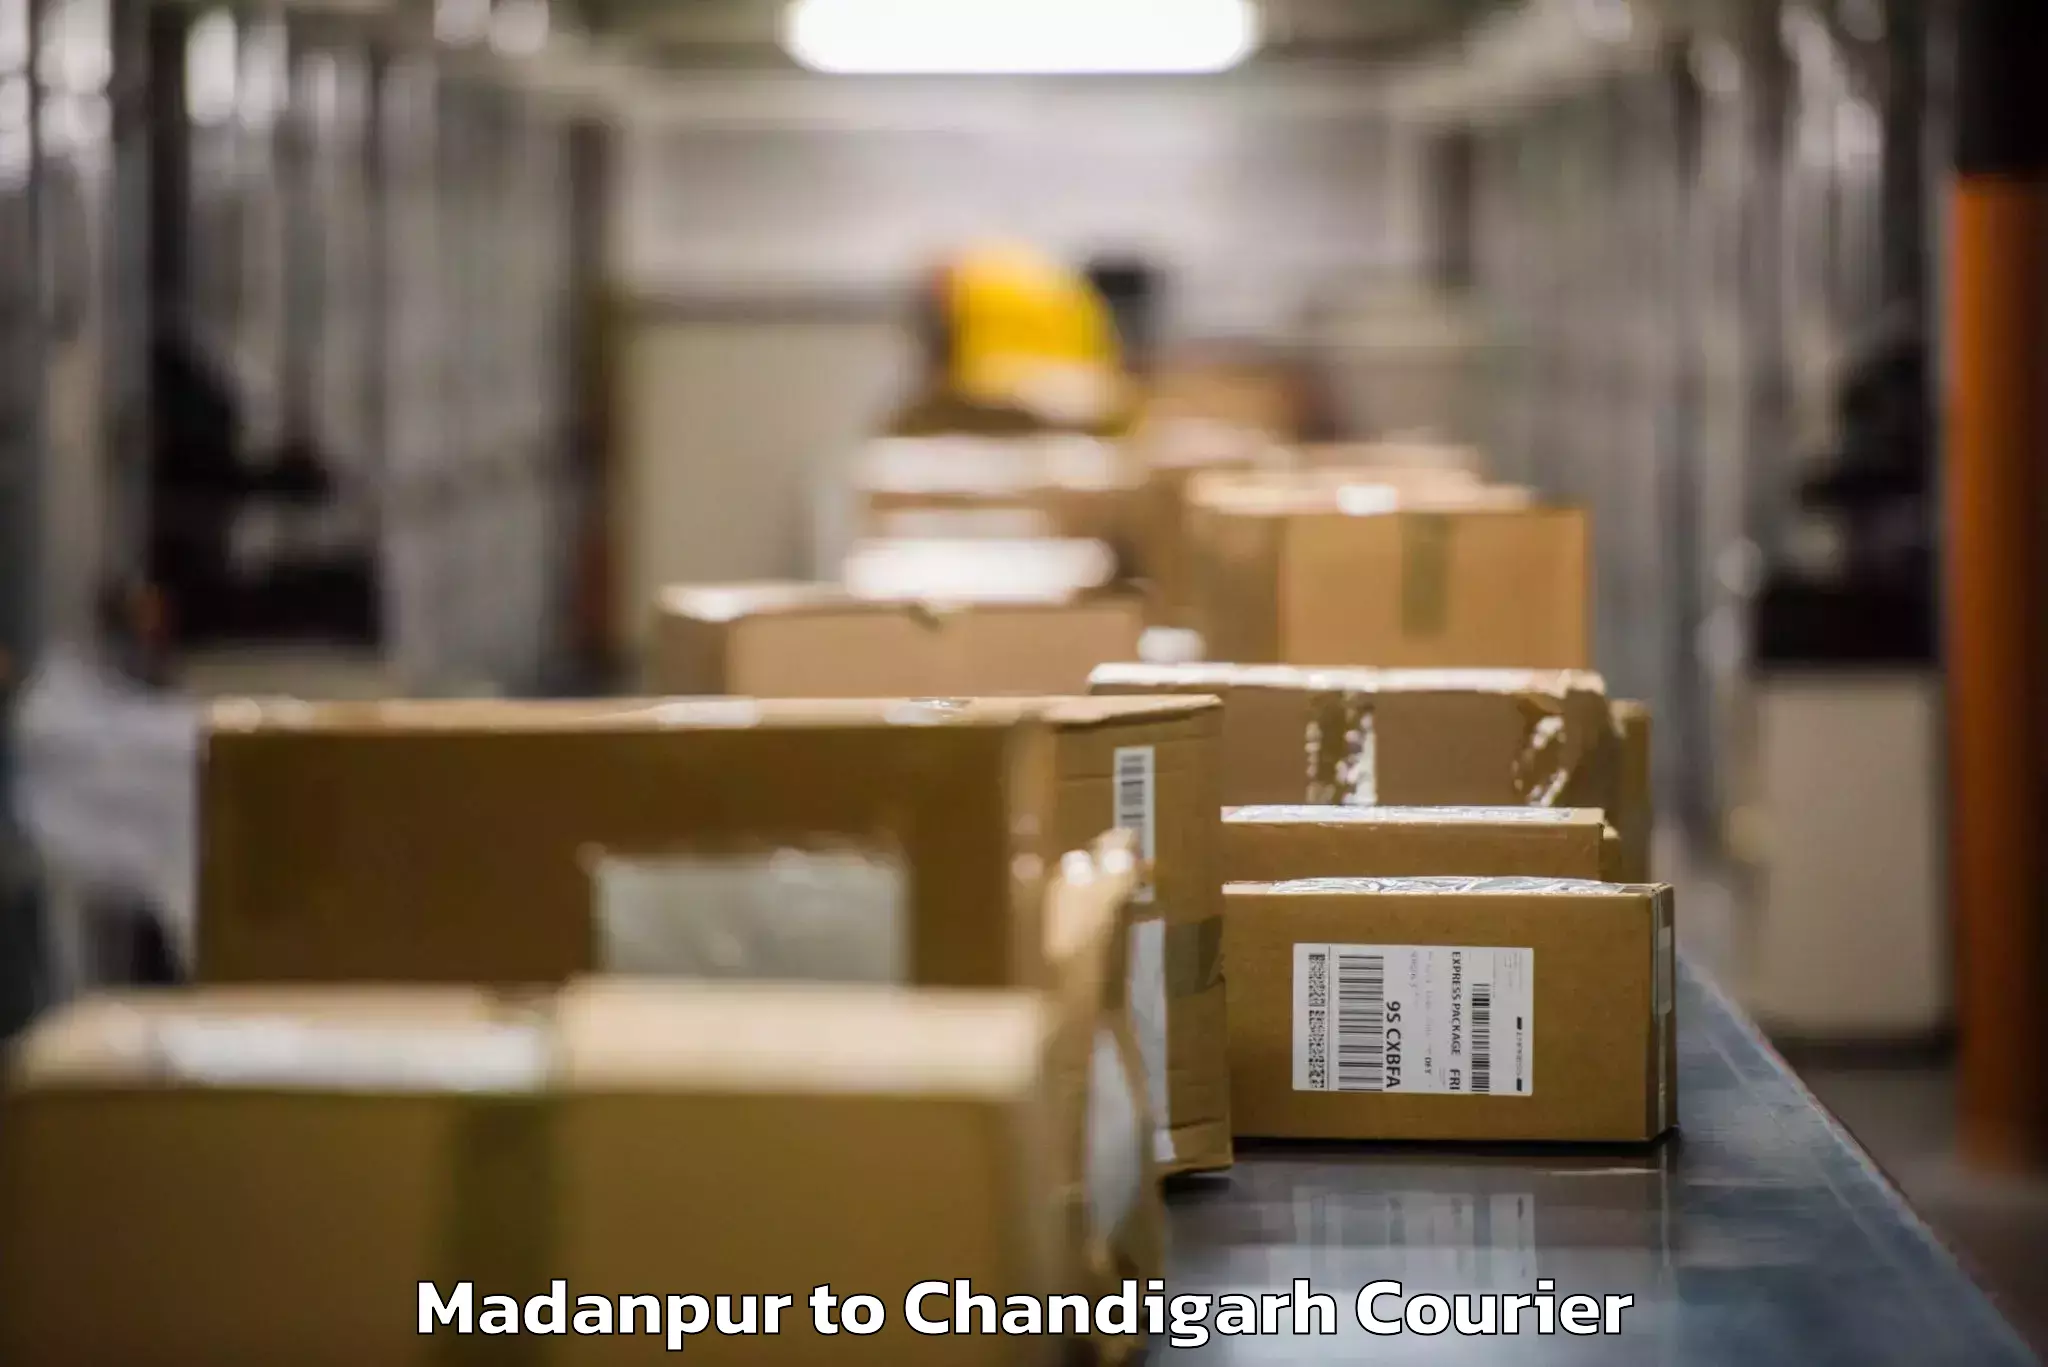 Baggage shipping experts Madanpur to Chandigarh